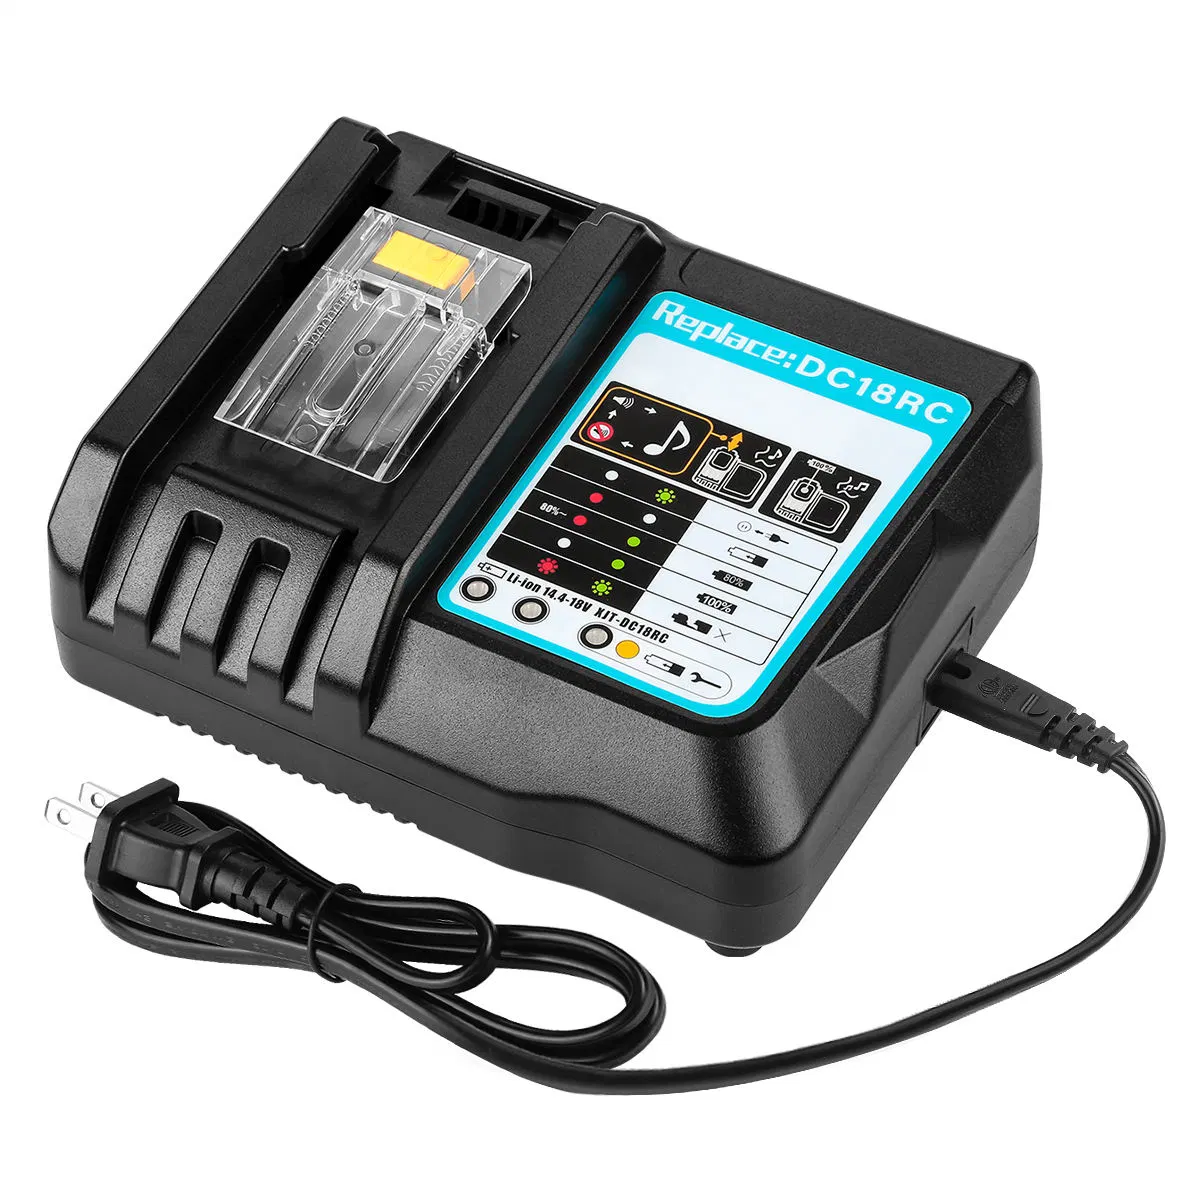 Li-ion Power Tools Battery Charger DC18RC Replacement for Makita 14.4V 18V Cordless Drill Charger for Makita Bl1830 Bl1840 Bl1850 Bl1860 Charger